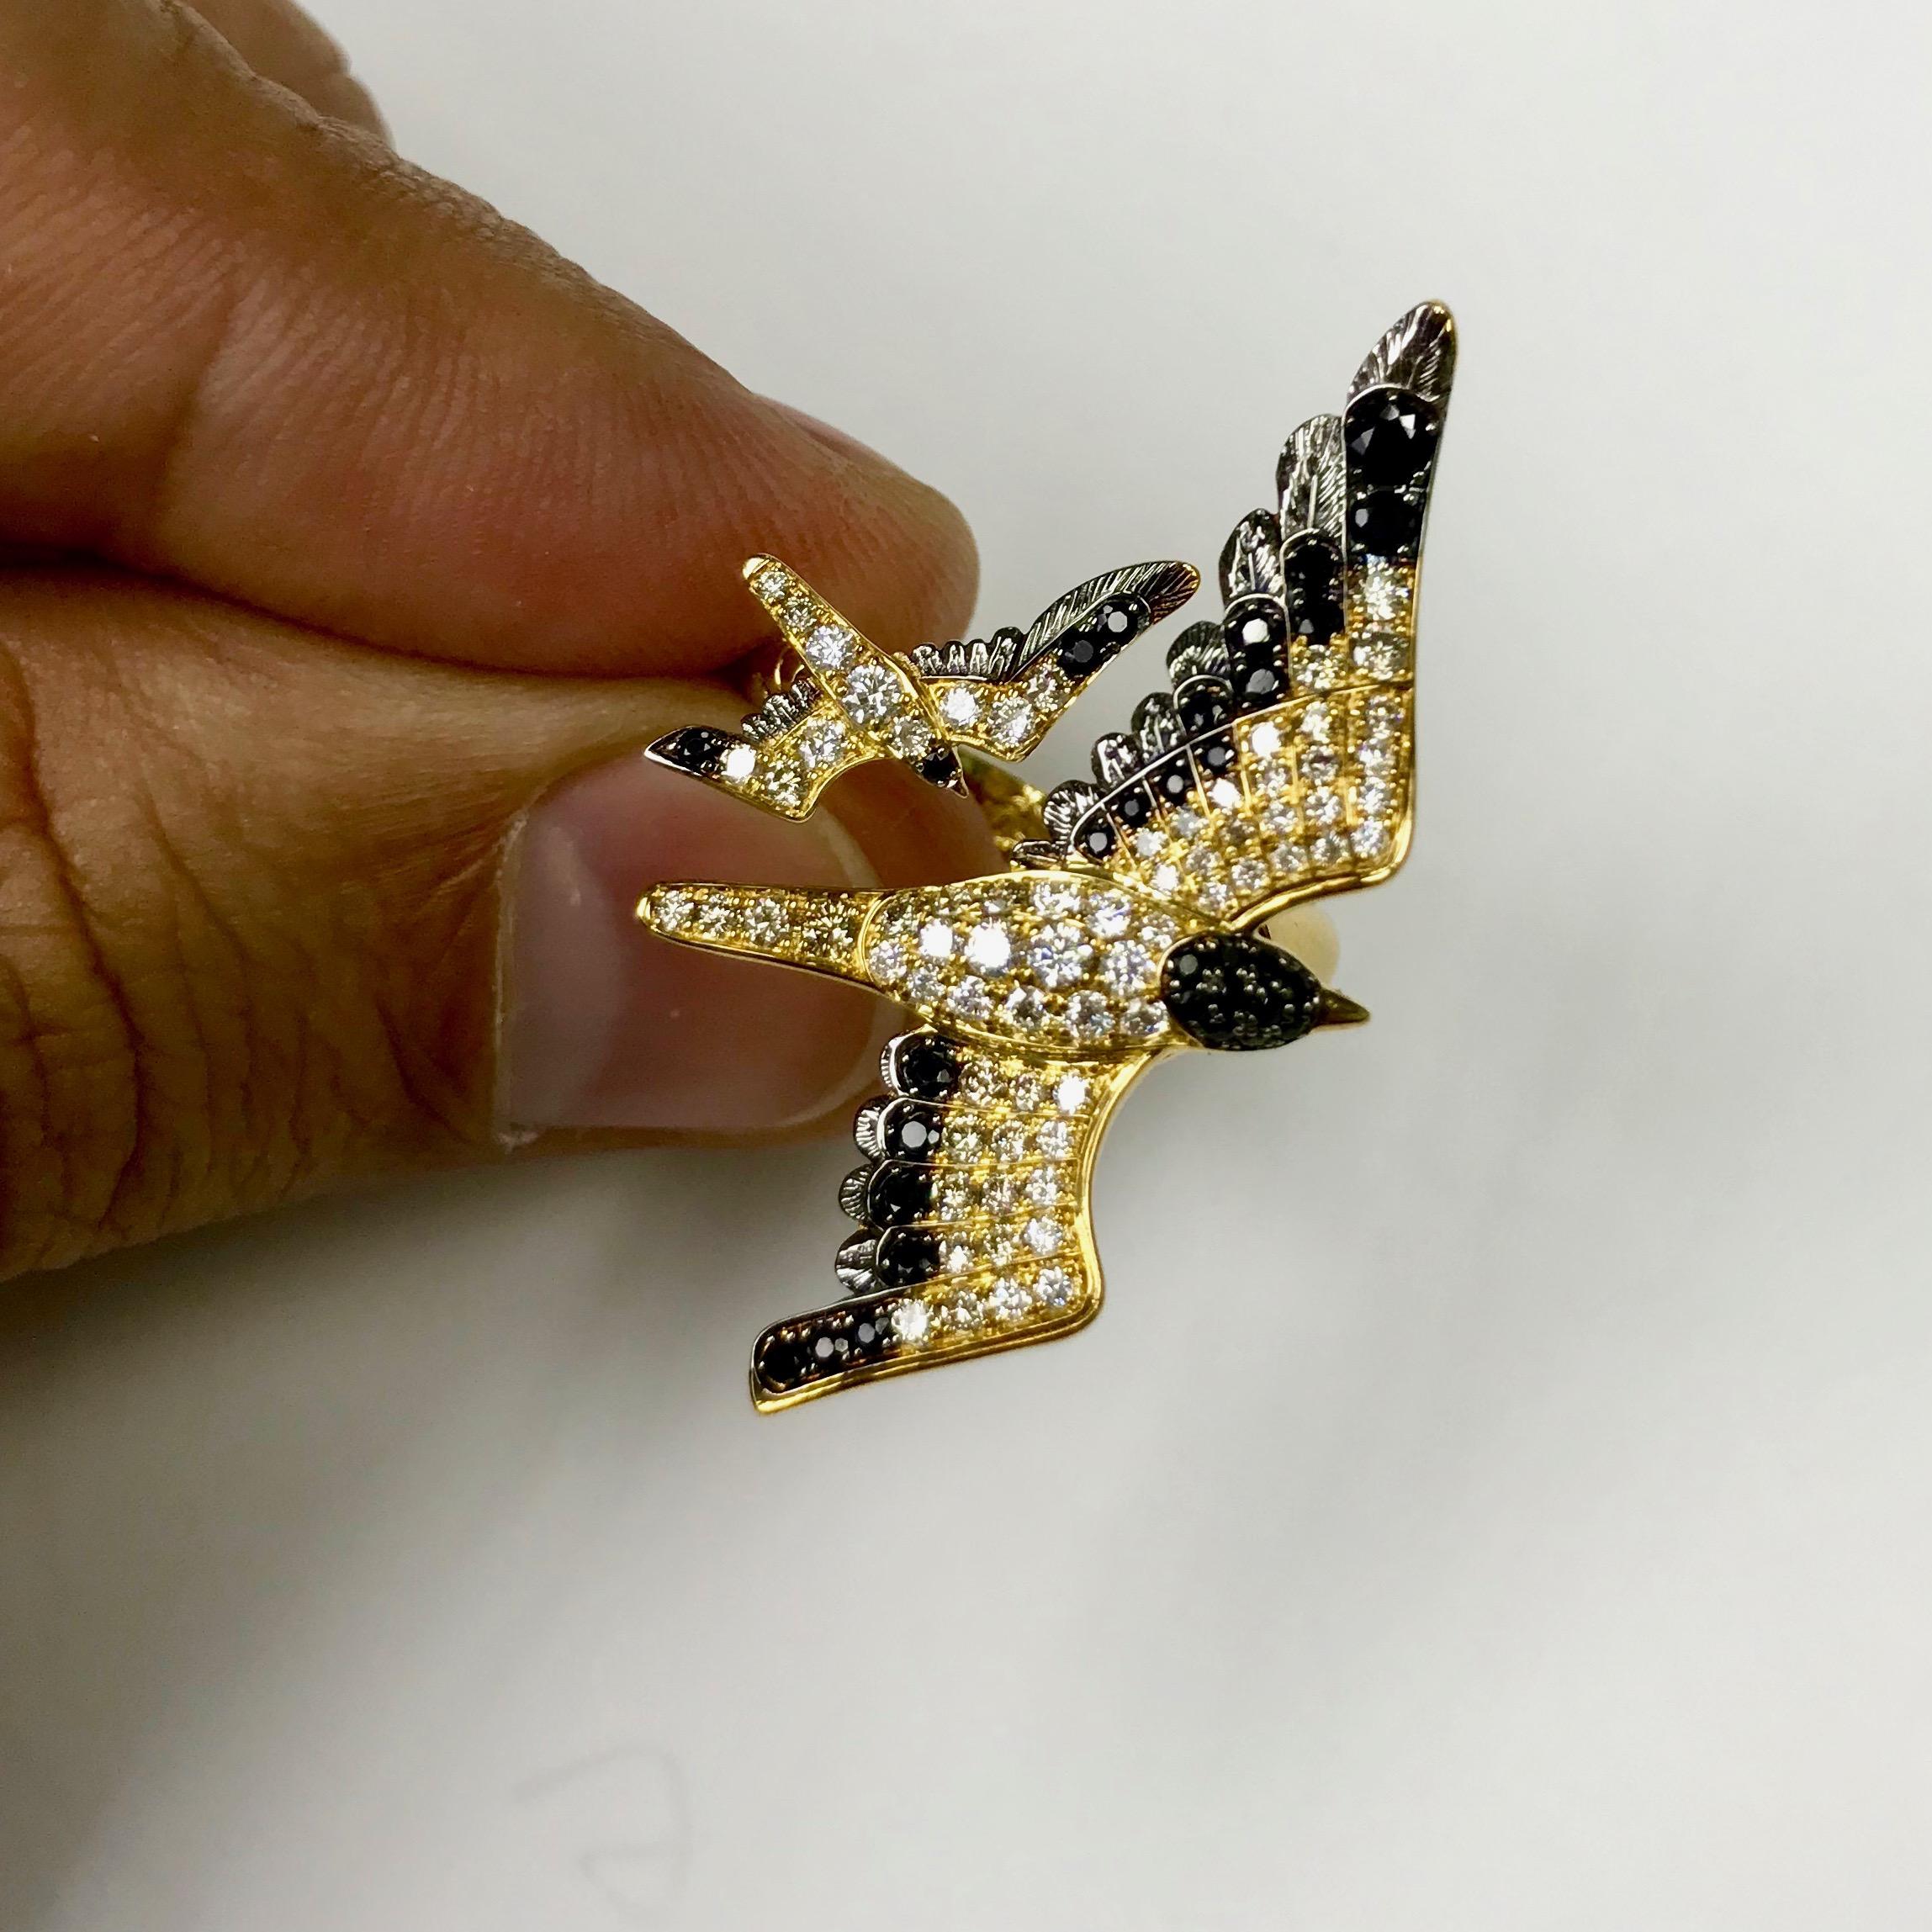 White and Brown Diamonds Black Sapphire 18 Karat Yellow Gold Seagull Ring
Highly detailed Seagull Ring. Combination of White and Champagne Diamonds gives fully impression that they are alive. This Ring represents two Seagulls flying to each other.